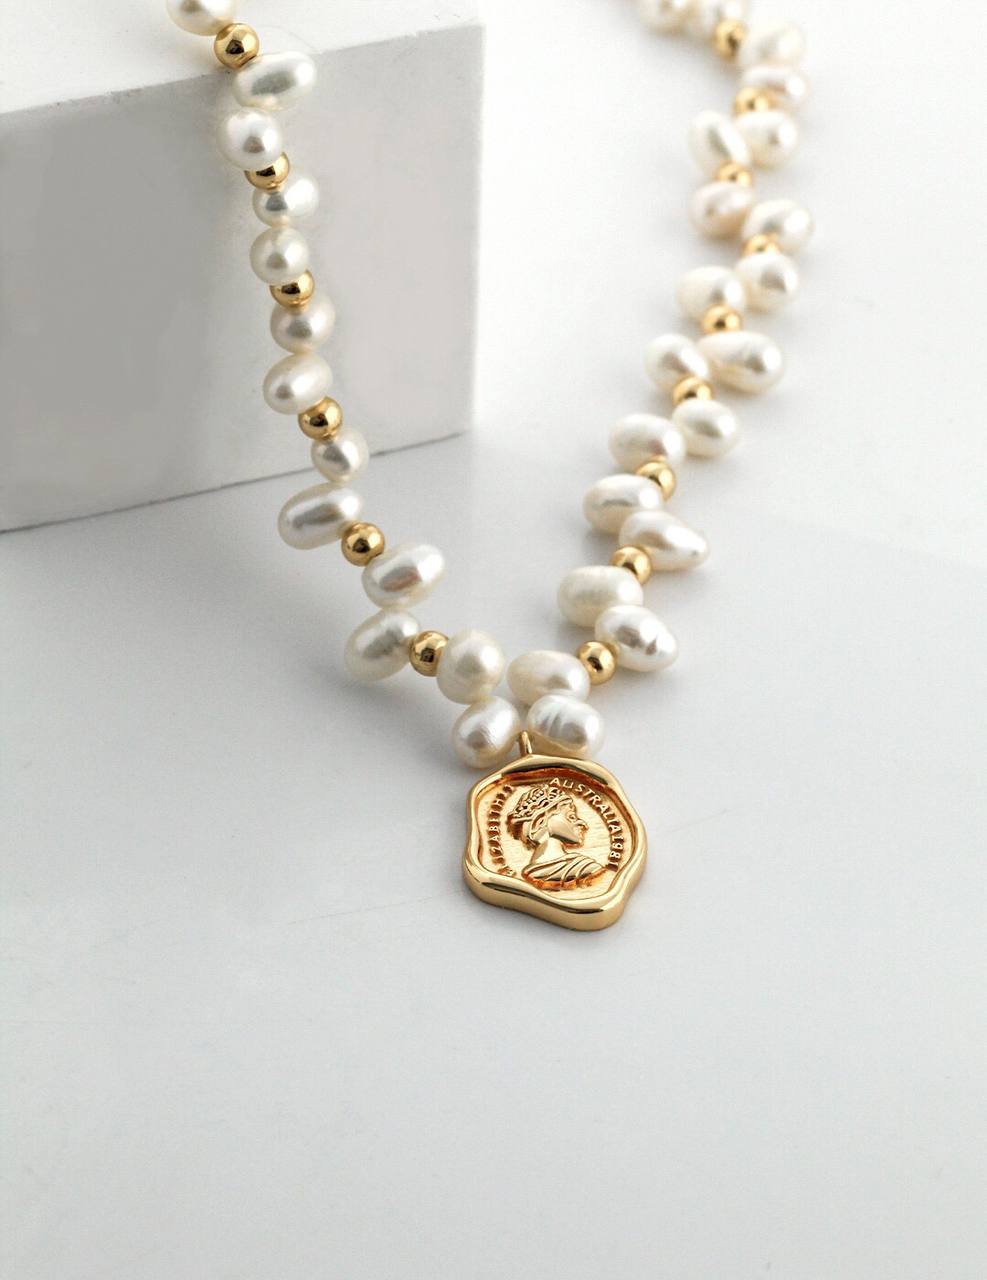 Queen Emblem Sterling Silver Natural Baroque Pearl Necklace